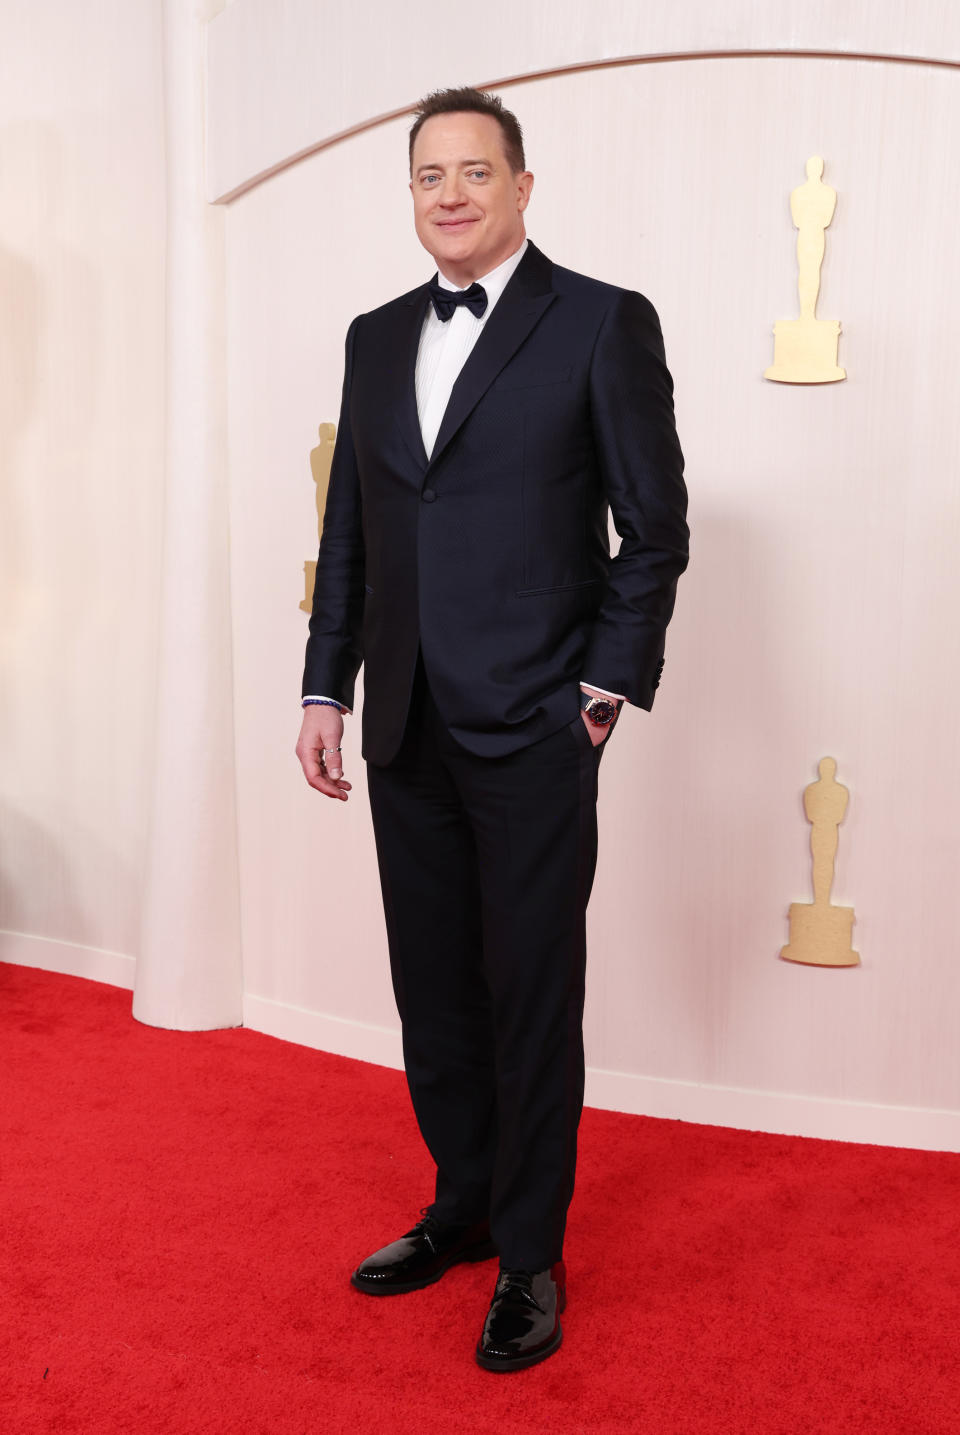 HOLLYWOOD, CALIFORNIA - MARCH 10: Brendan Fraser attends the 96th Annual Academy Awards on March 10, 2024 in Hollywood, California. (Photo by Kevin Mazur/Getty Images)